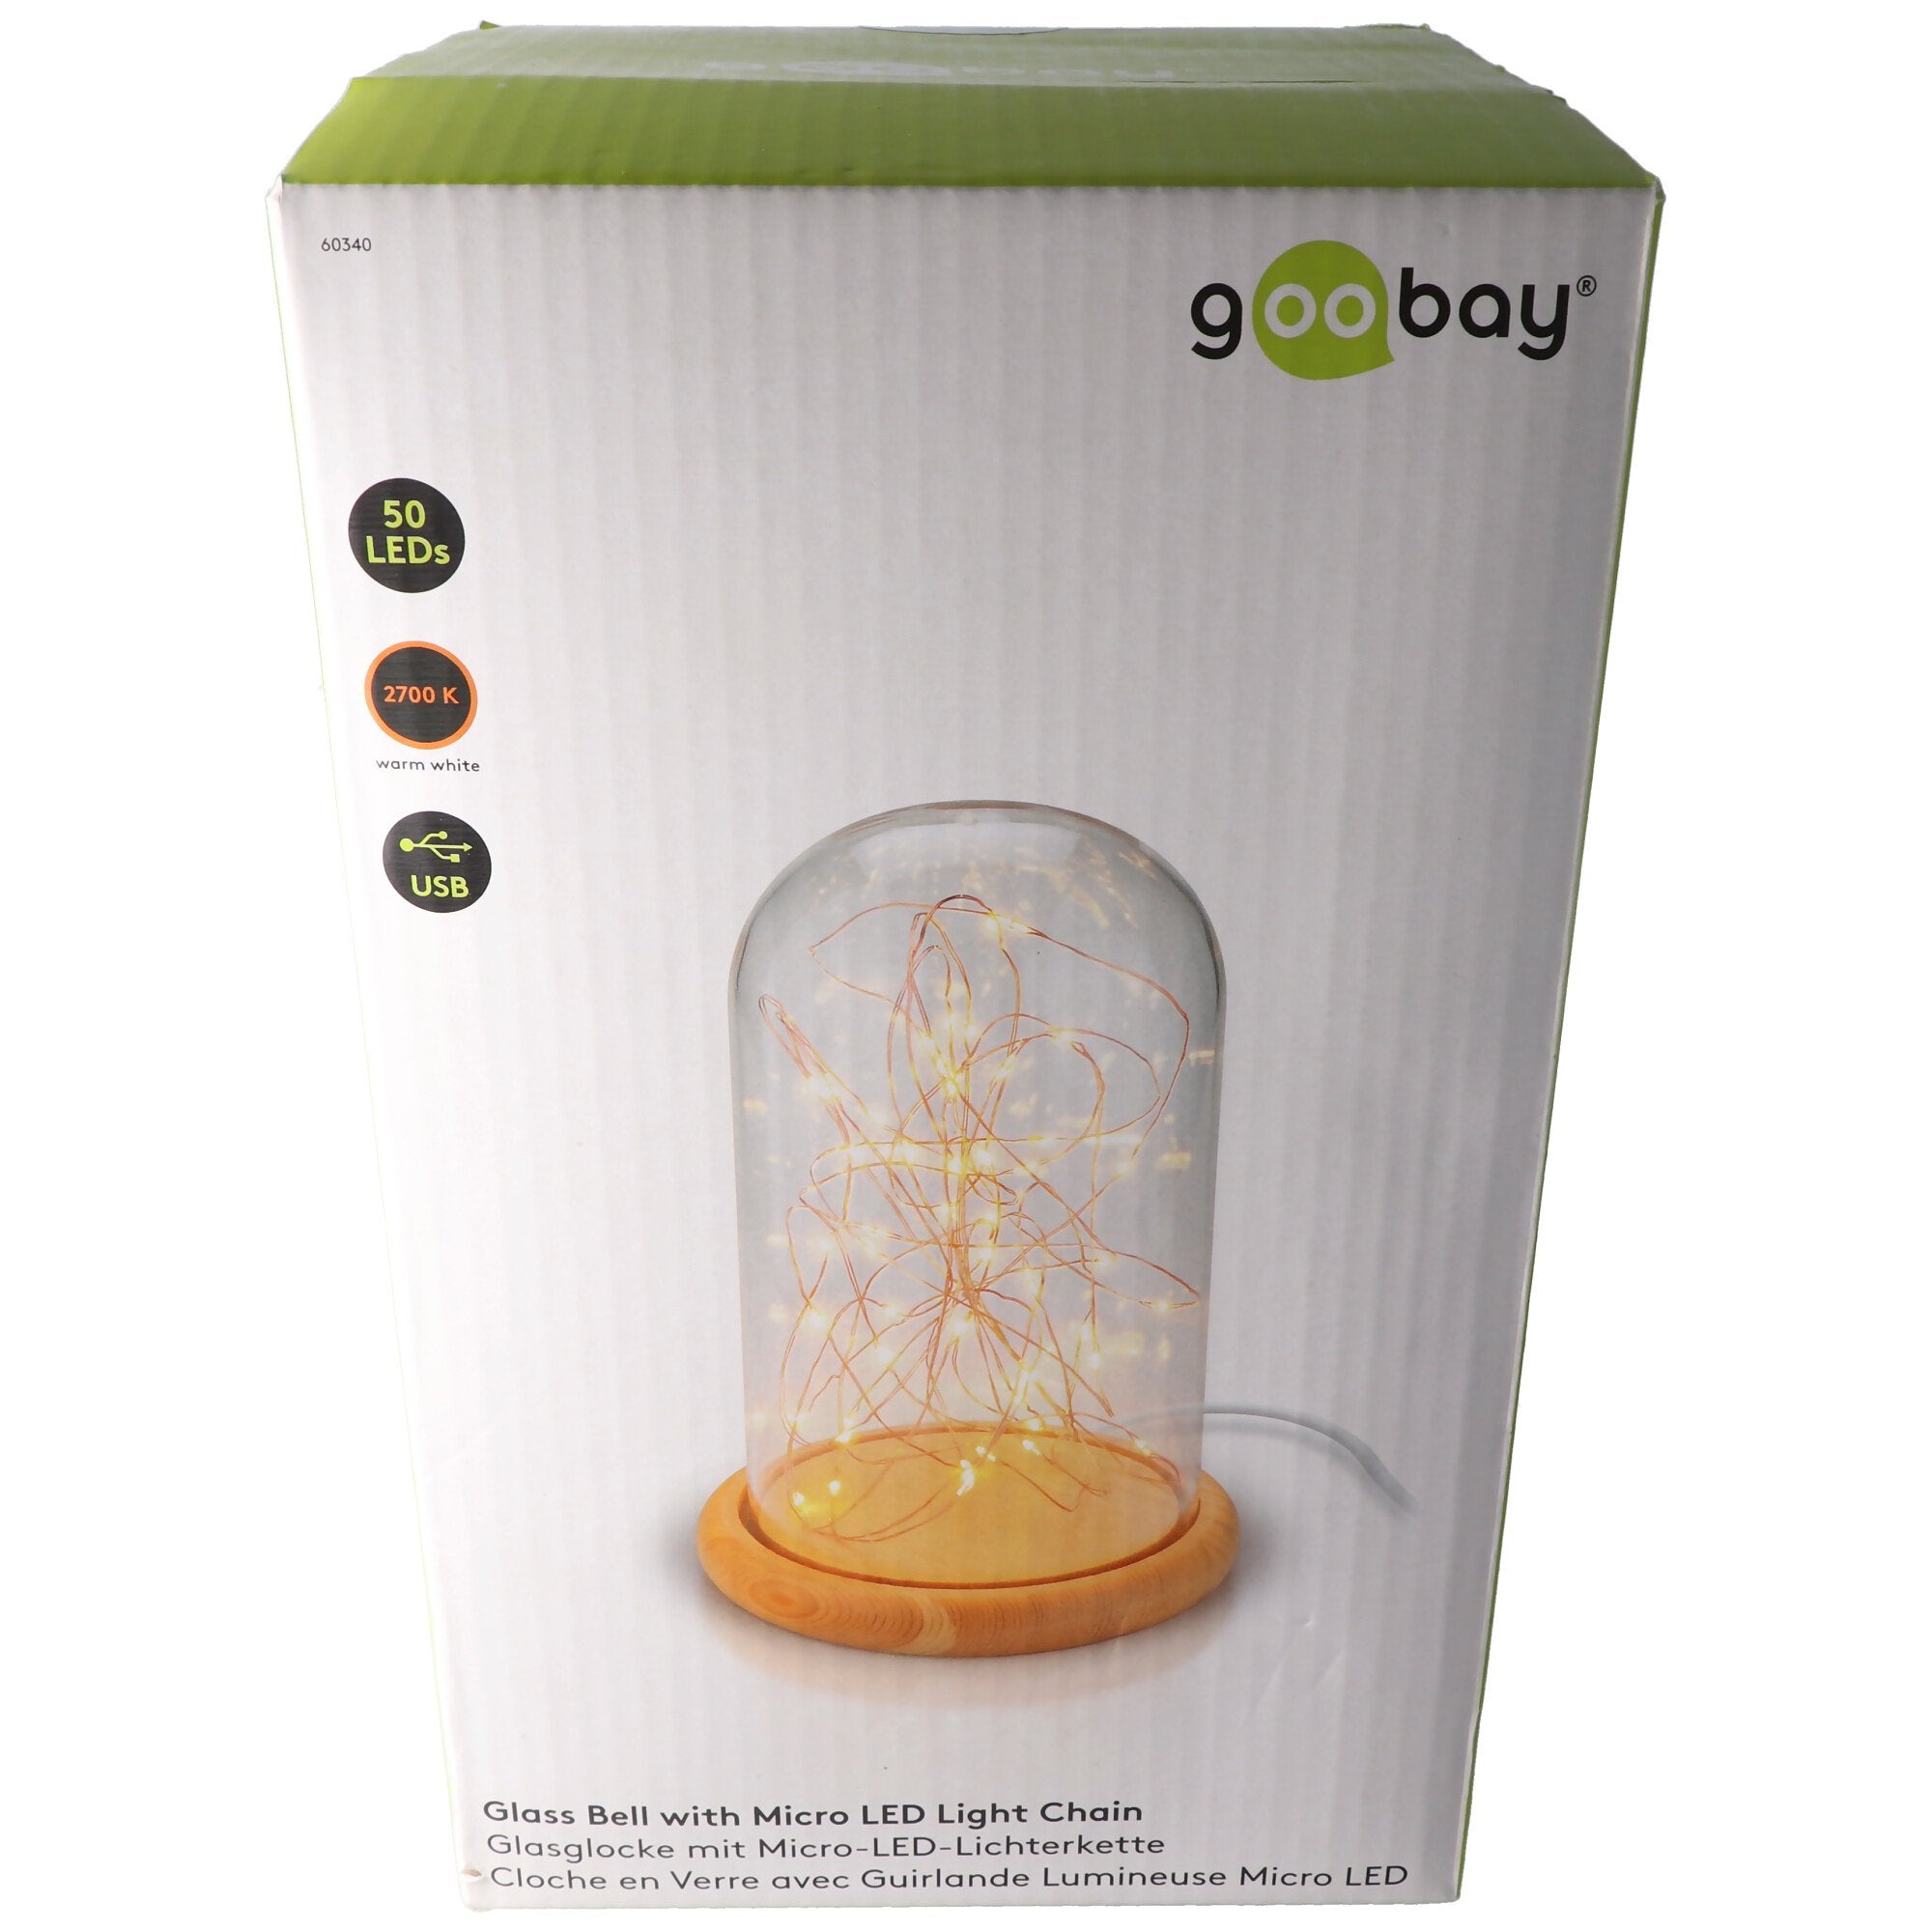 Goobay glass bell with LED micro light chain - with wooden base, USB cable 115 cm, light chain 5 m w